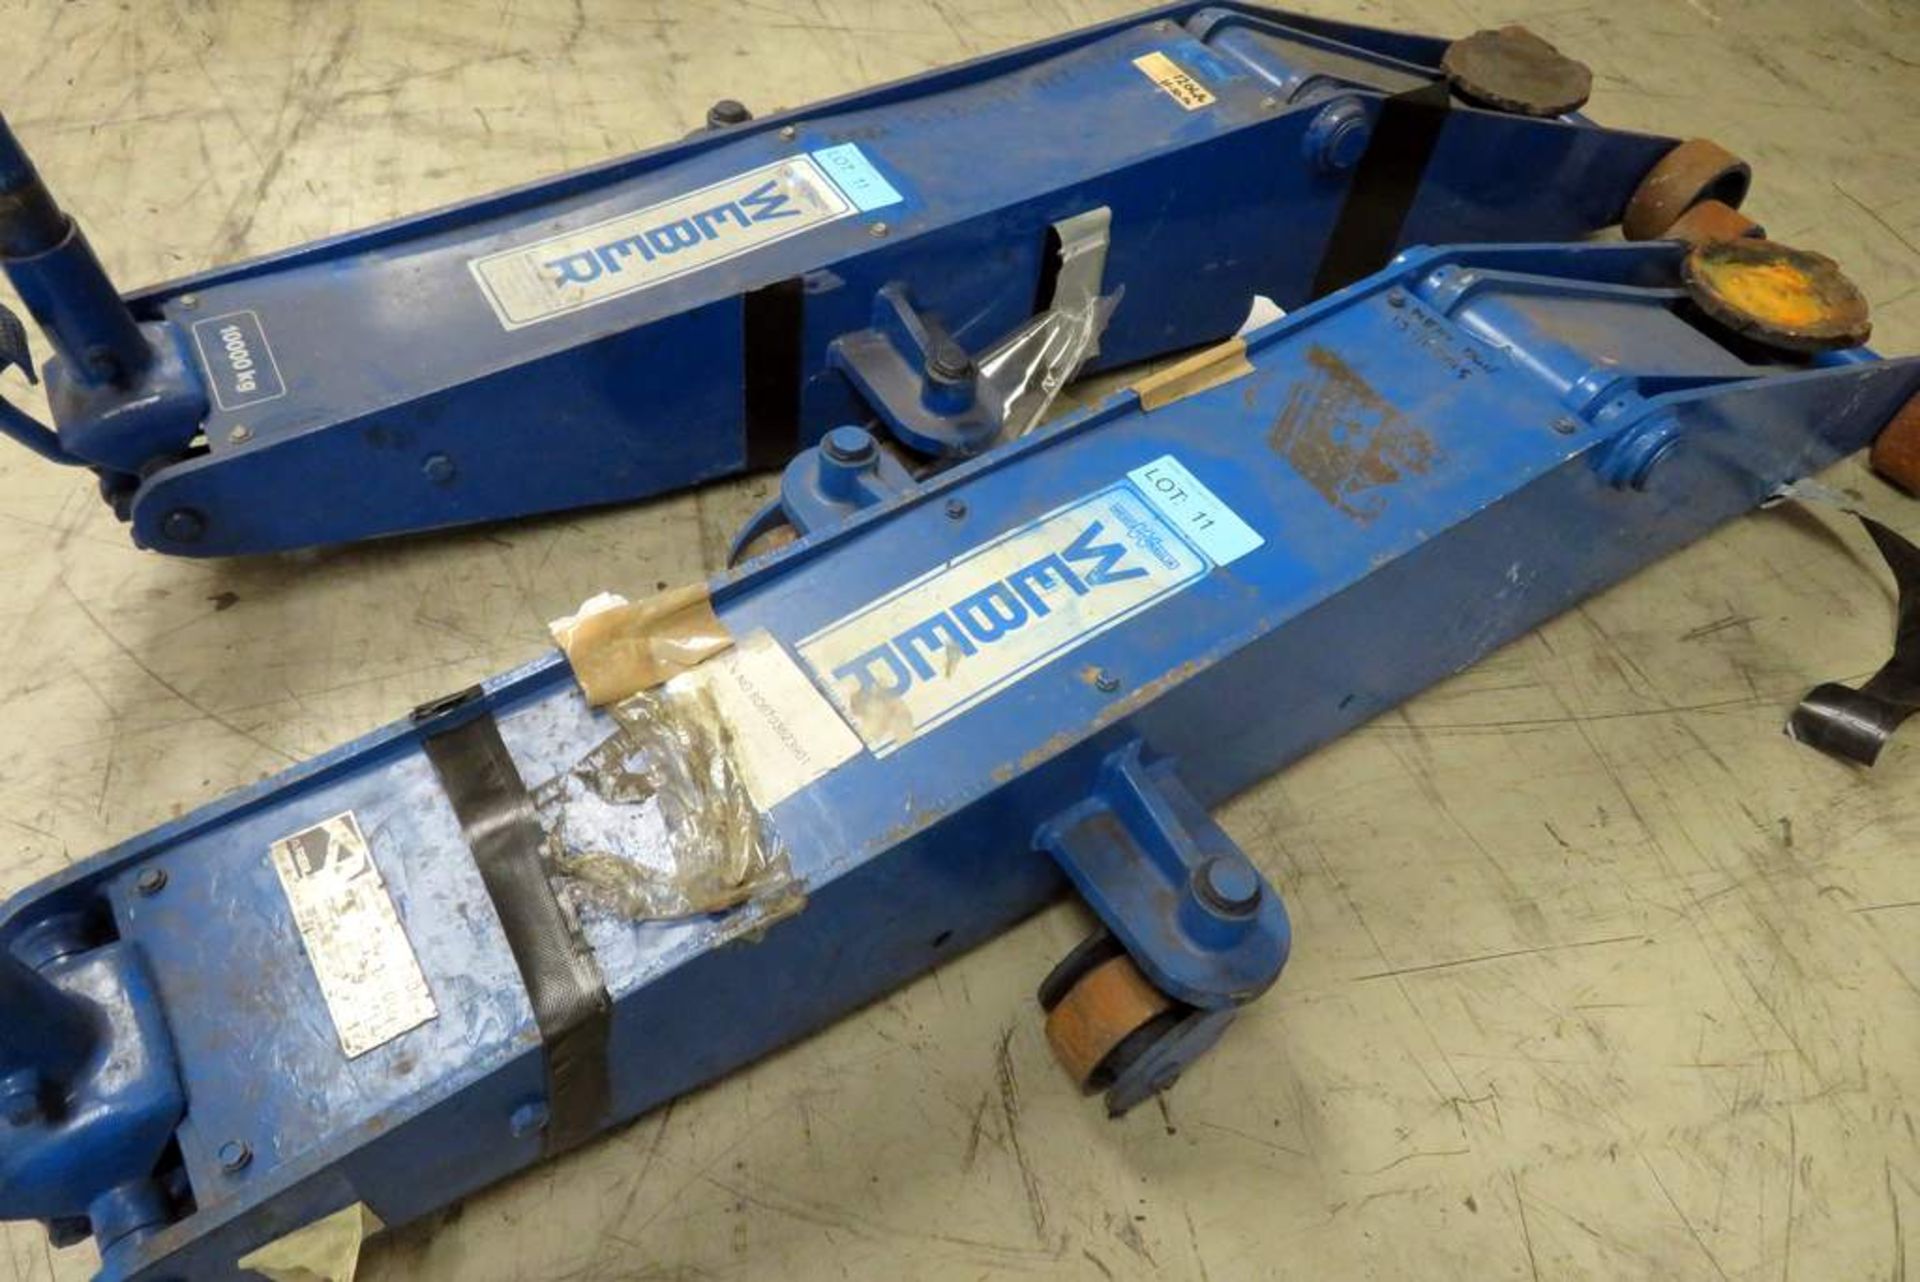 2x Weber 10 Tonne Vehicle Trolley Jacks Complete With Handle - WDK100LQ - Working Condition - Image 4 of 8